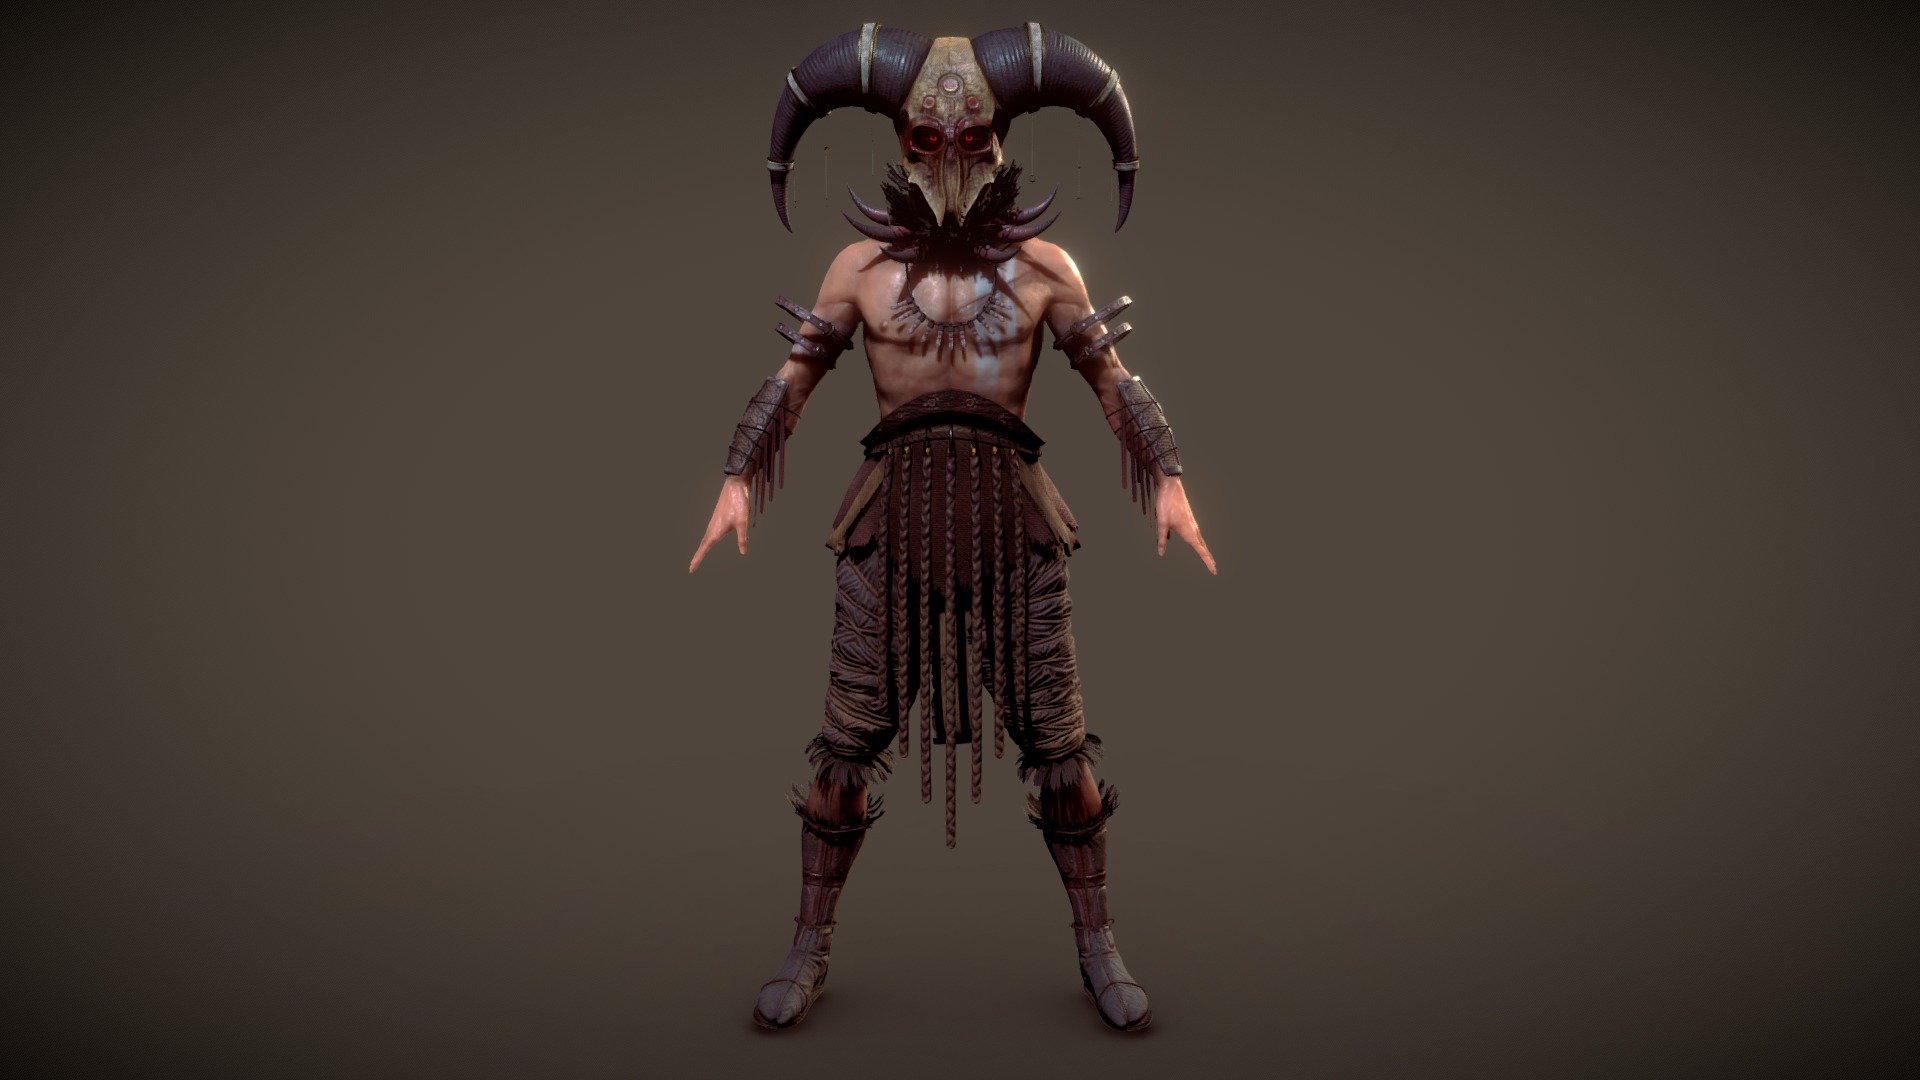 An old model from my studies! A Mythical Guardian Warrior character inspired by Viking and Tribal culture. 2K textures

https://www.fabaze.com/muavasi - Mua Vasi - 3D model by F A B A Z E (@fabaze) 3d model